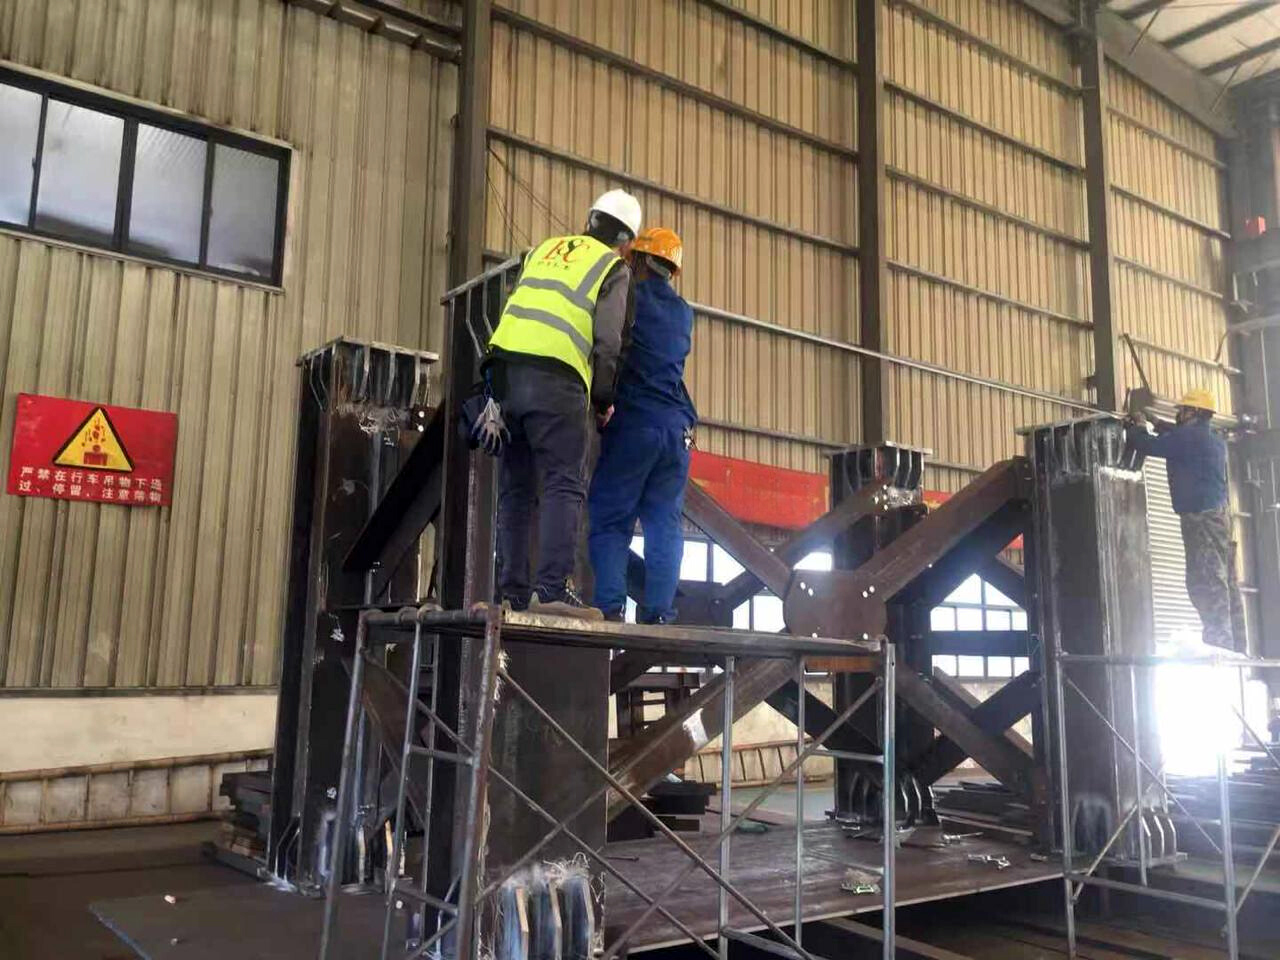 Auxiliary bridge fabrication - Structural steel component inspection